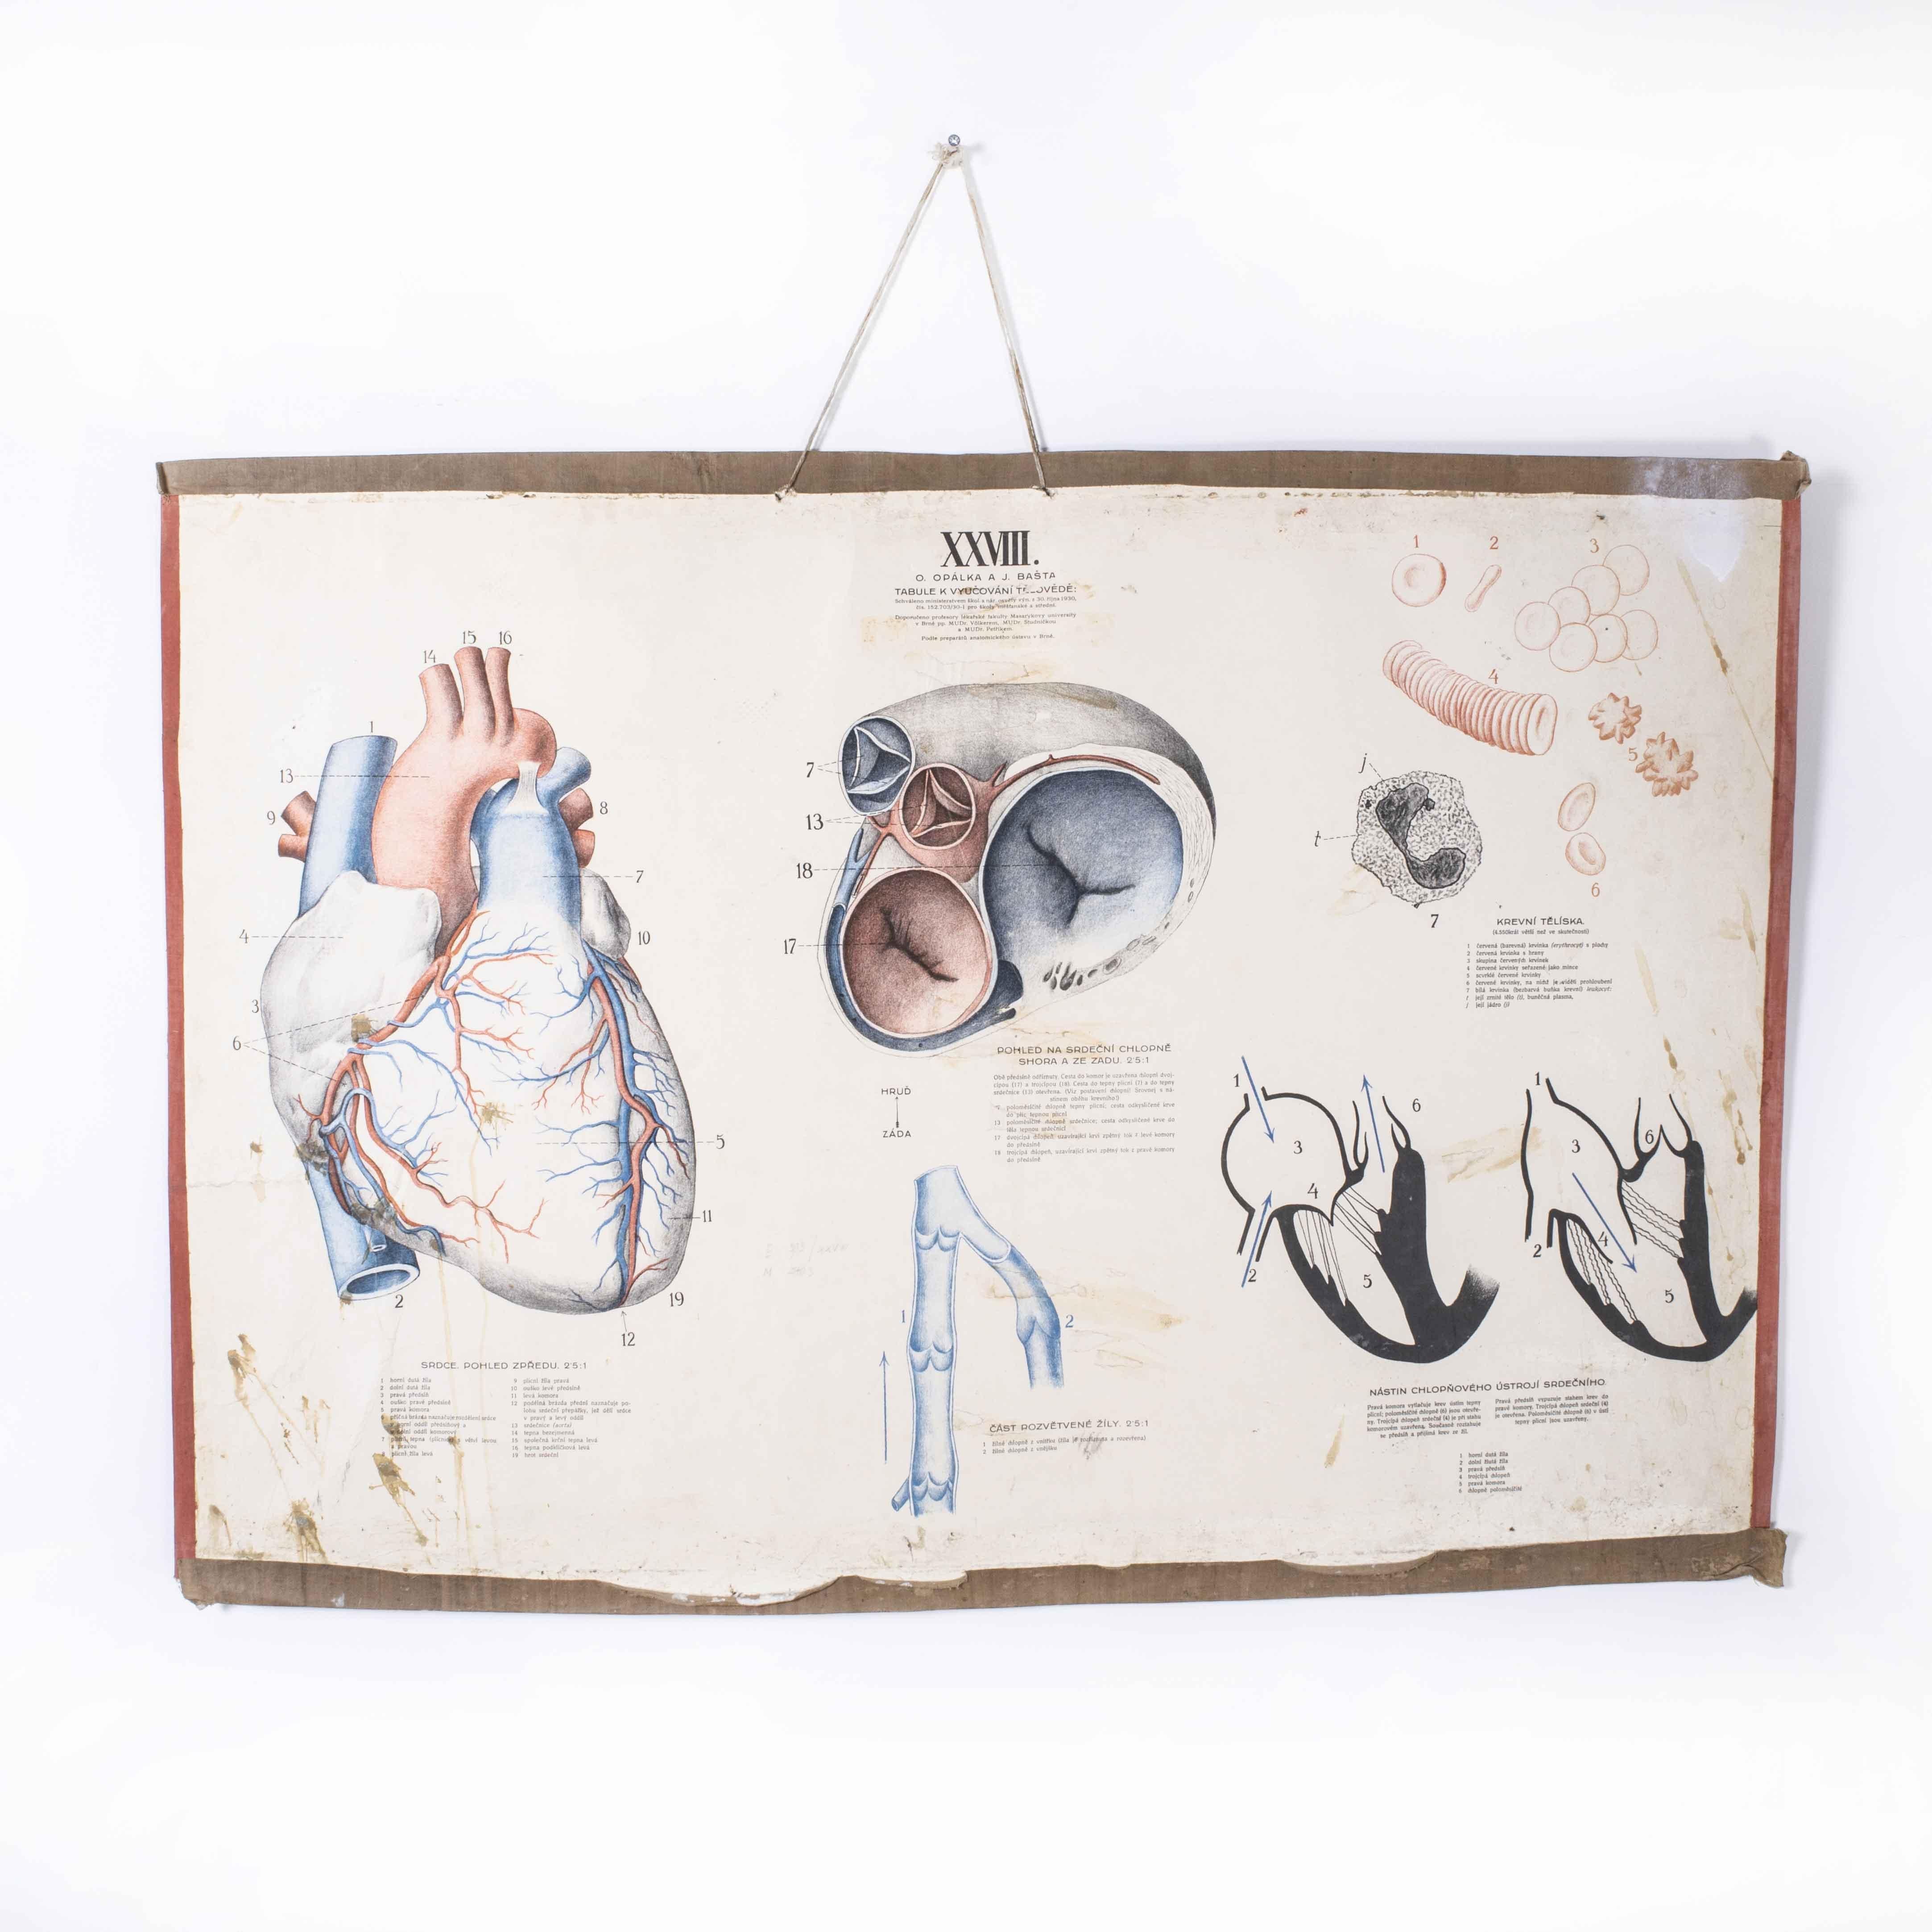 1930’s Human Heart Educational Poster
1930’s Human Heart Educational Poster. Early 20th century Czechoslovakian educational human heart poster. A rare and vintage wall chart from the Czech Republic illustrating the heart of a human. This rigid card